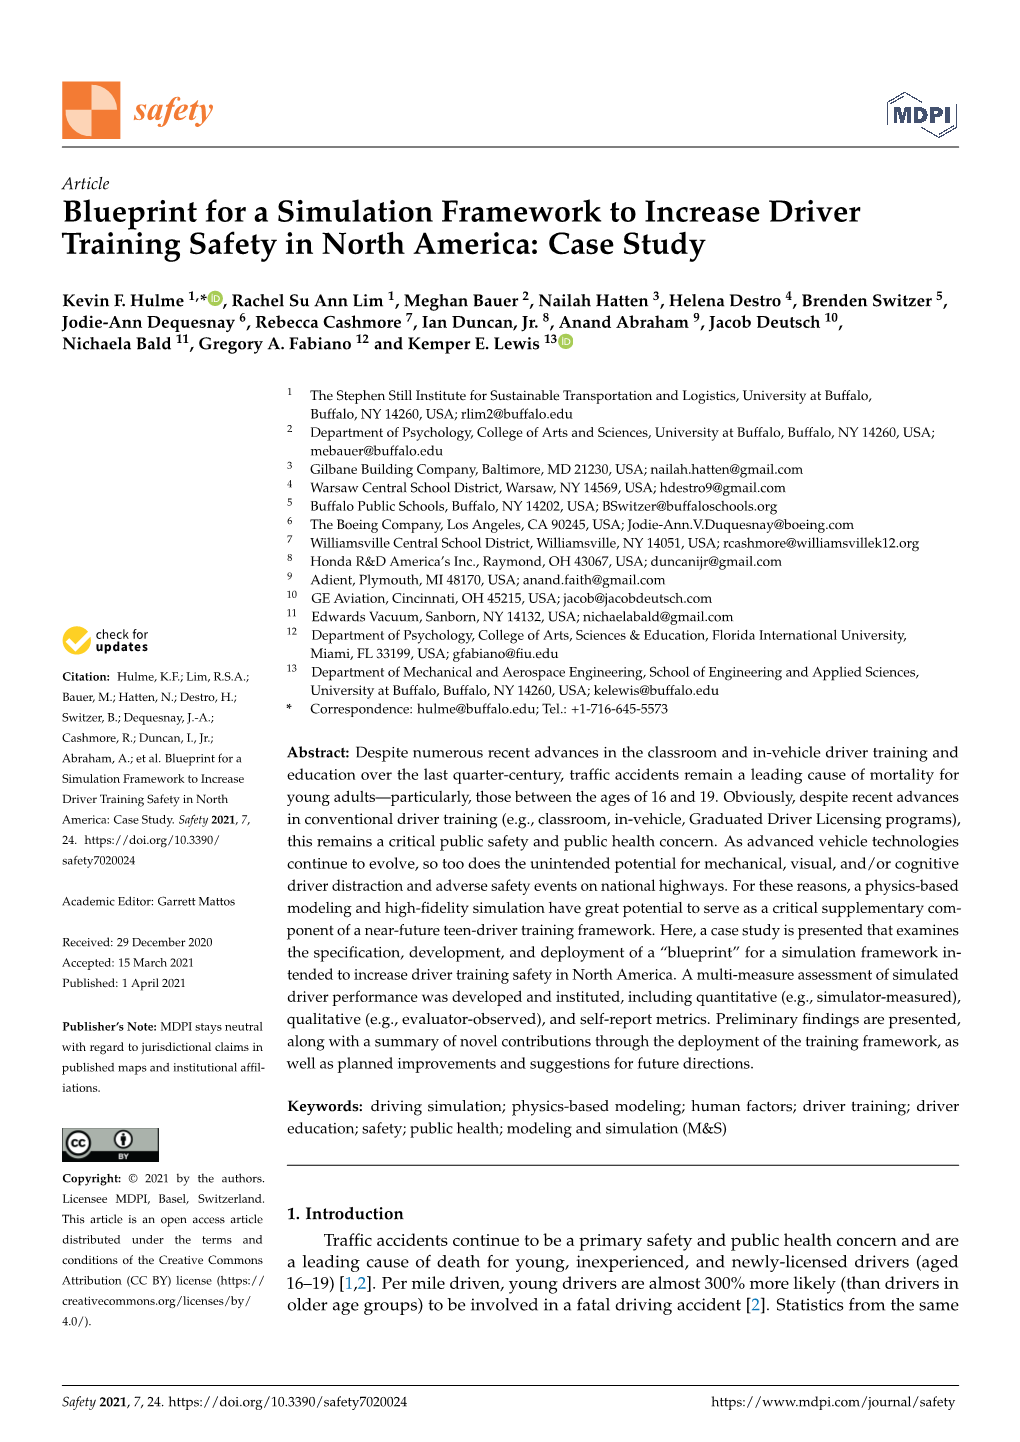 Blueprint for a Simulation Framework to Increase Driver Training Safety in North America: Case Study